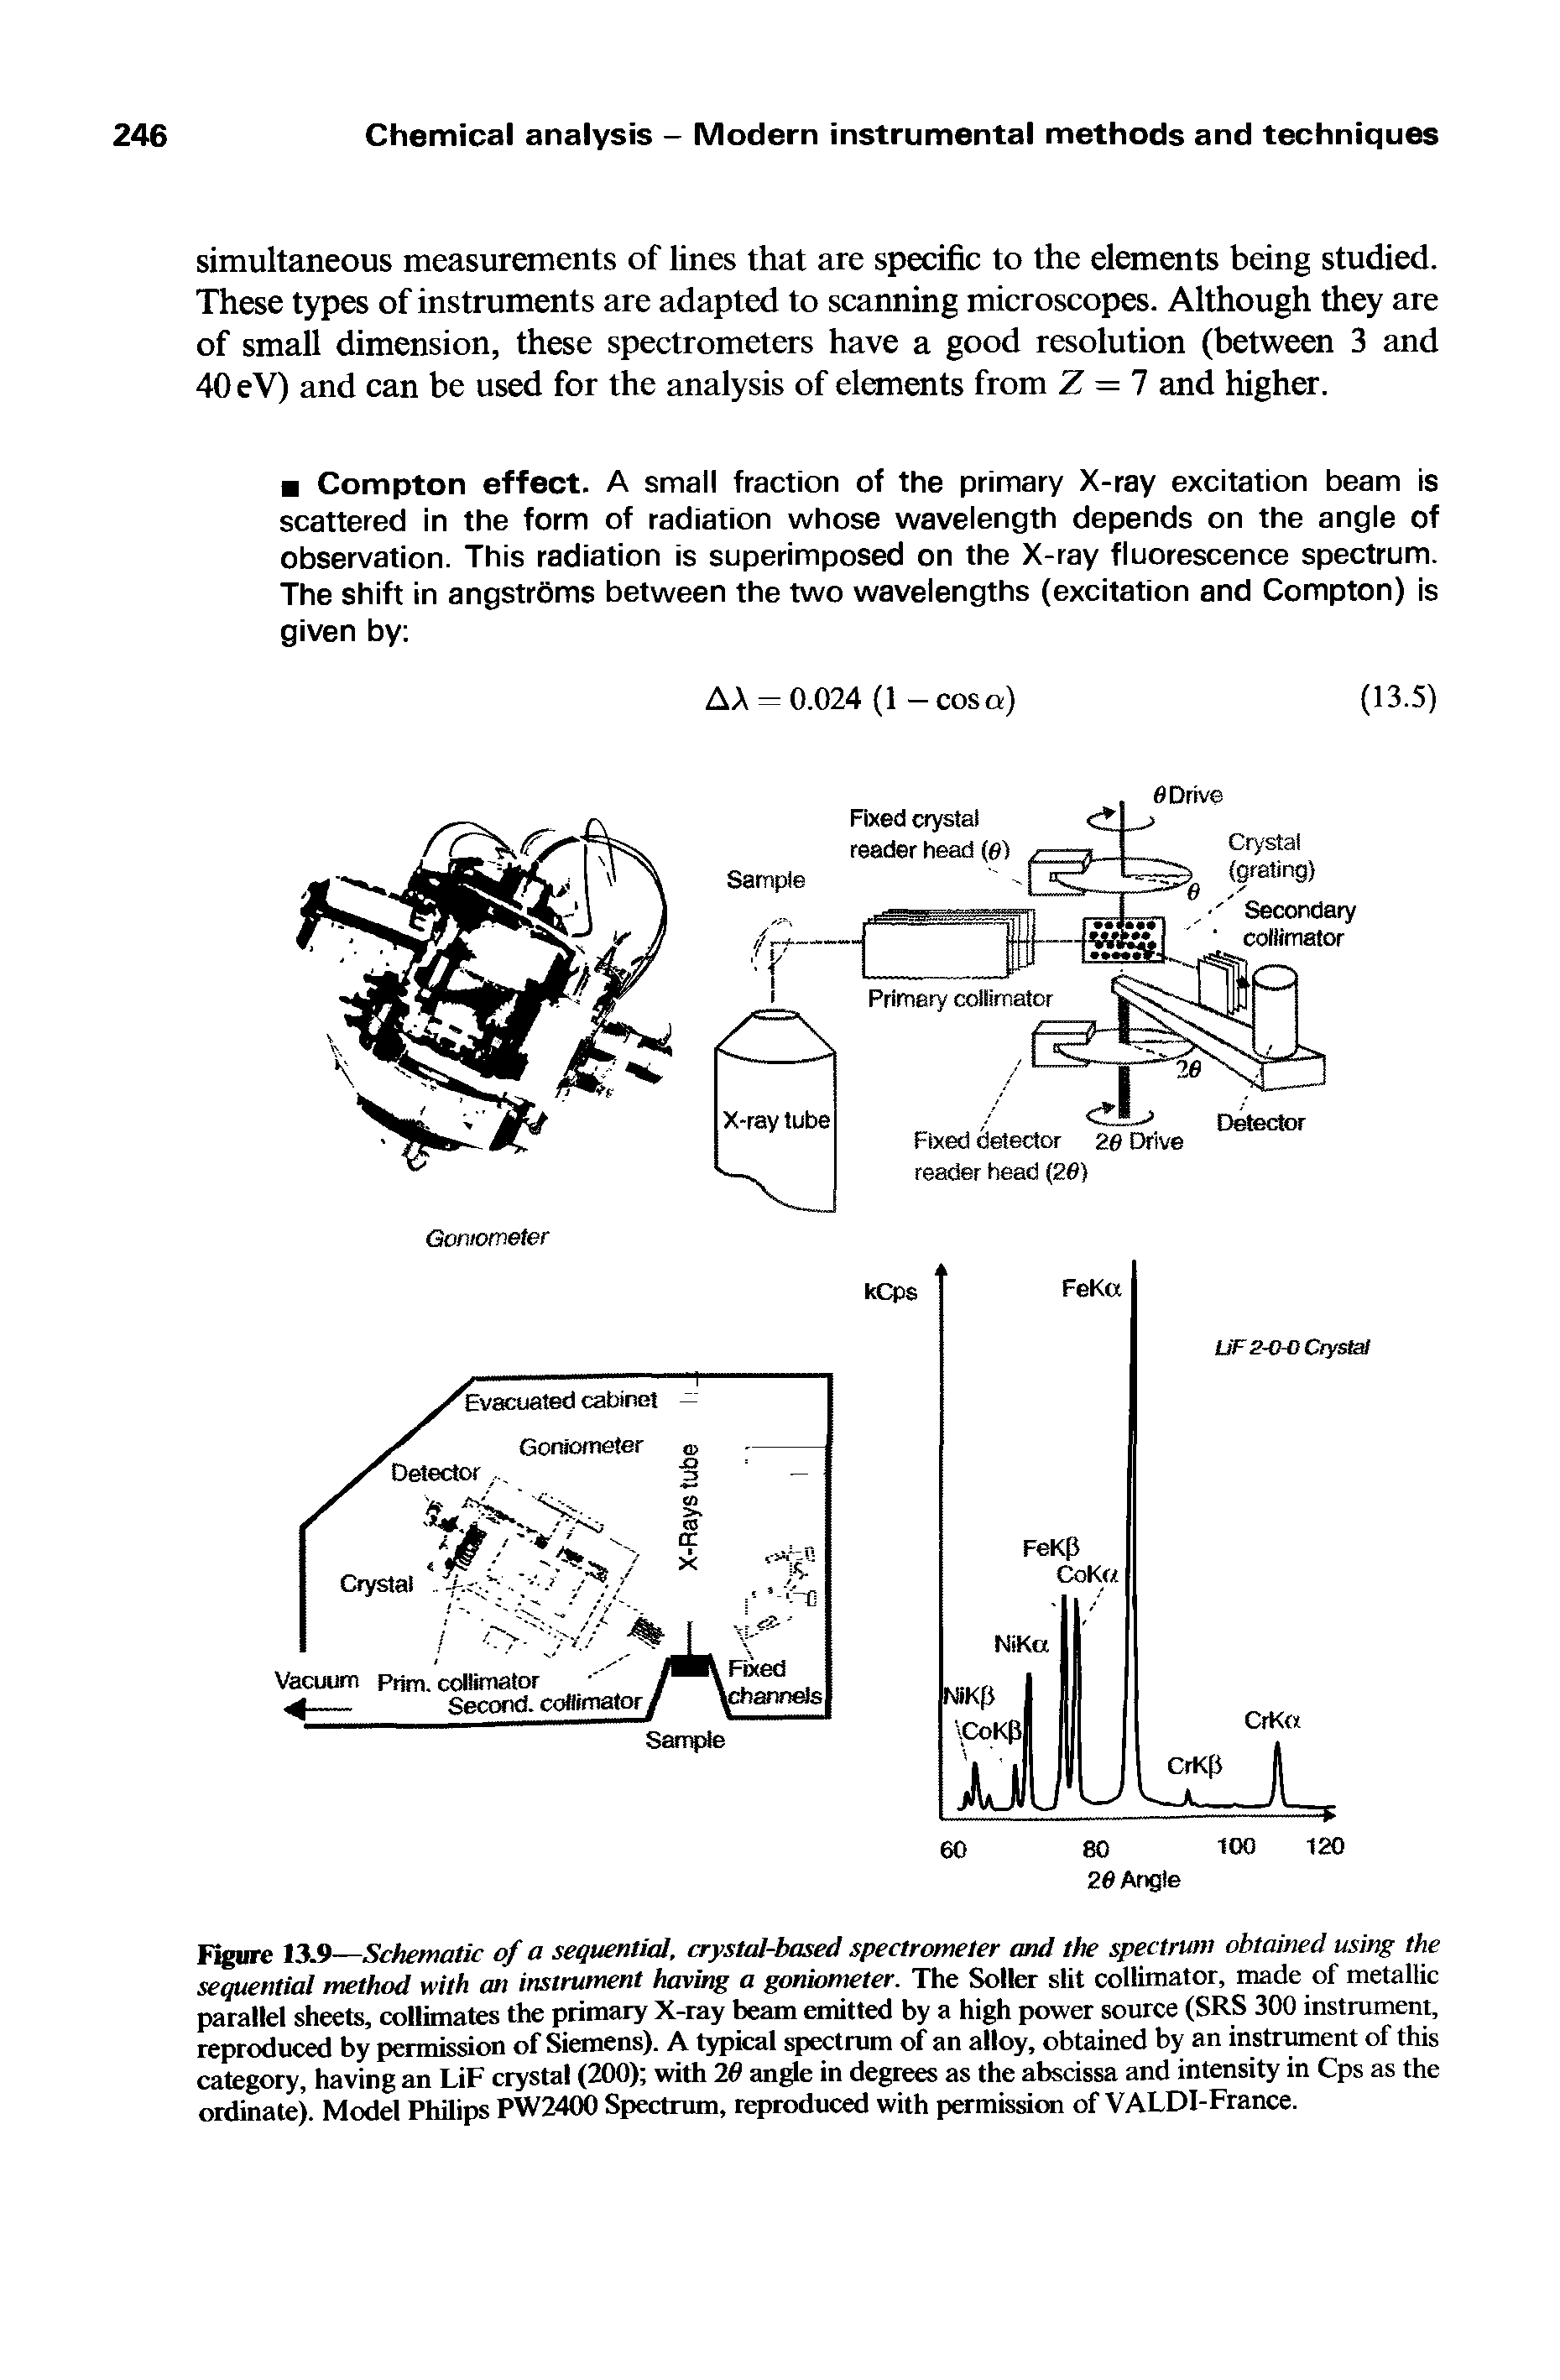 Figure 13.9—Schematic of a sequential, crystal-based spectrometer and the spectrum obtained using the sequential method with an instrument having a goniometer. The Soller slit collimator, made of metallic parallel sheets, collimates the primary X-ray beam emitted by a high power source (SRS 300 instrument, reproduced by permission of Siemens). A typical spectrum of an alloy, obtained by an instrument of this category, having an LiF crystal (200) with 26 angle in degrees as the abscissa and intensity in Cps as the ordinate). Model Philips PW2400 Spectrum, reproduced with permission of VALDI-France.